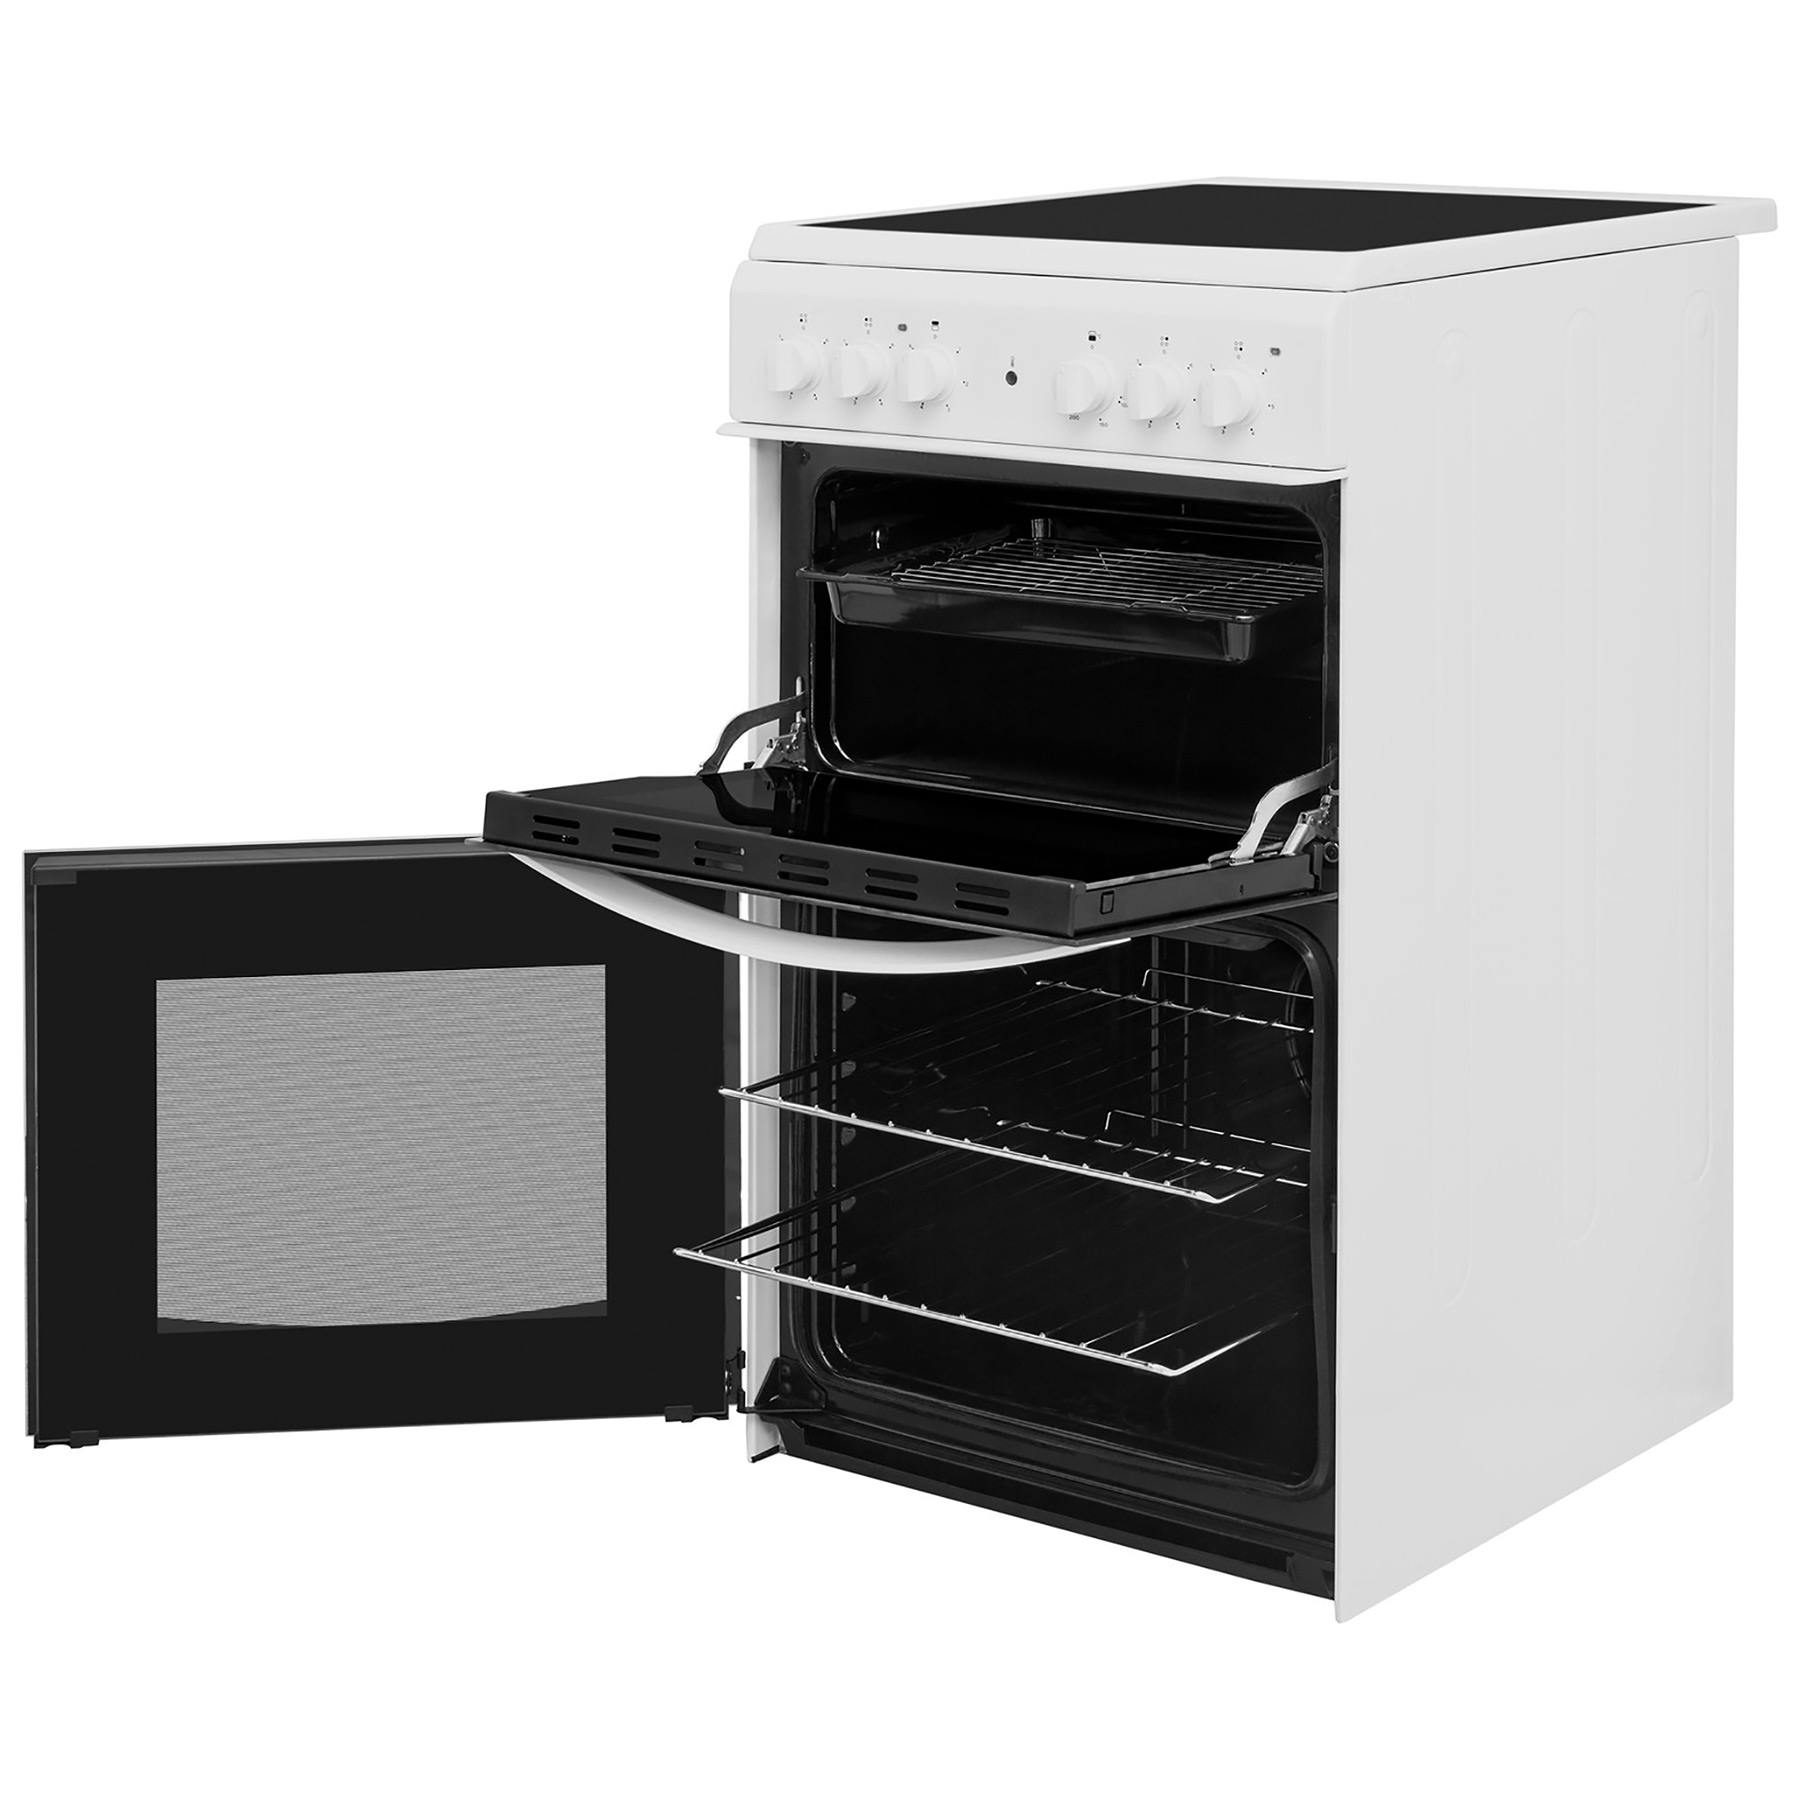 White Indesit ID5V92KMW 50cm Double Cavity Electric Cooker With Ceramic Hob 